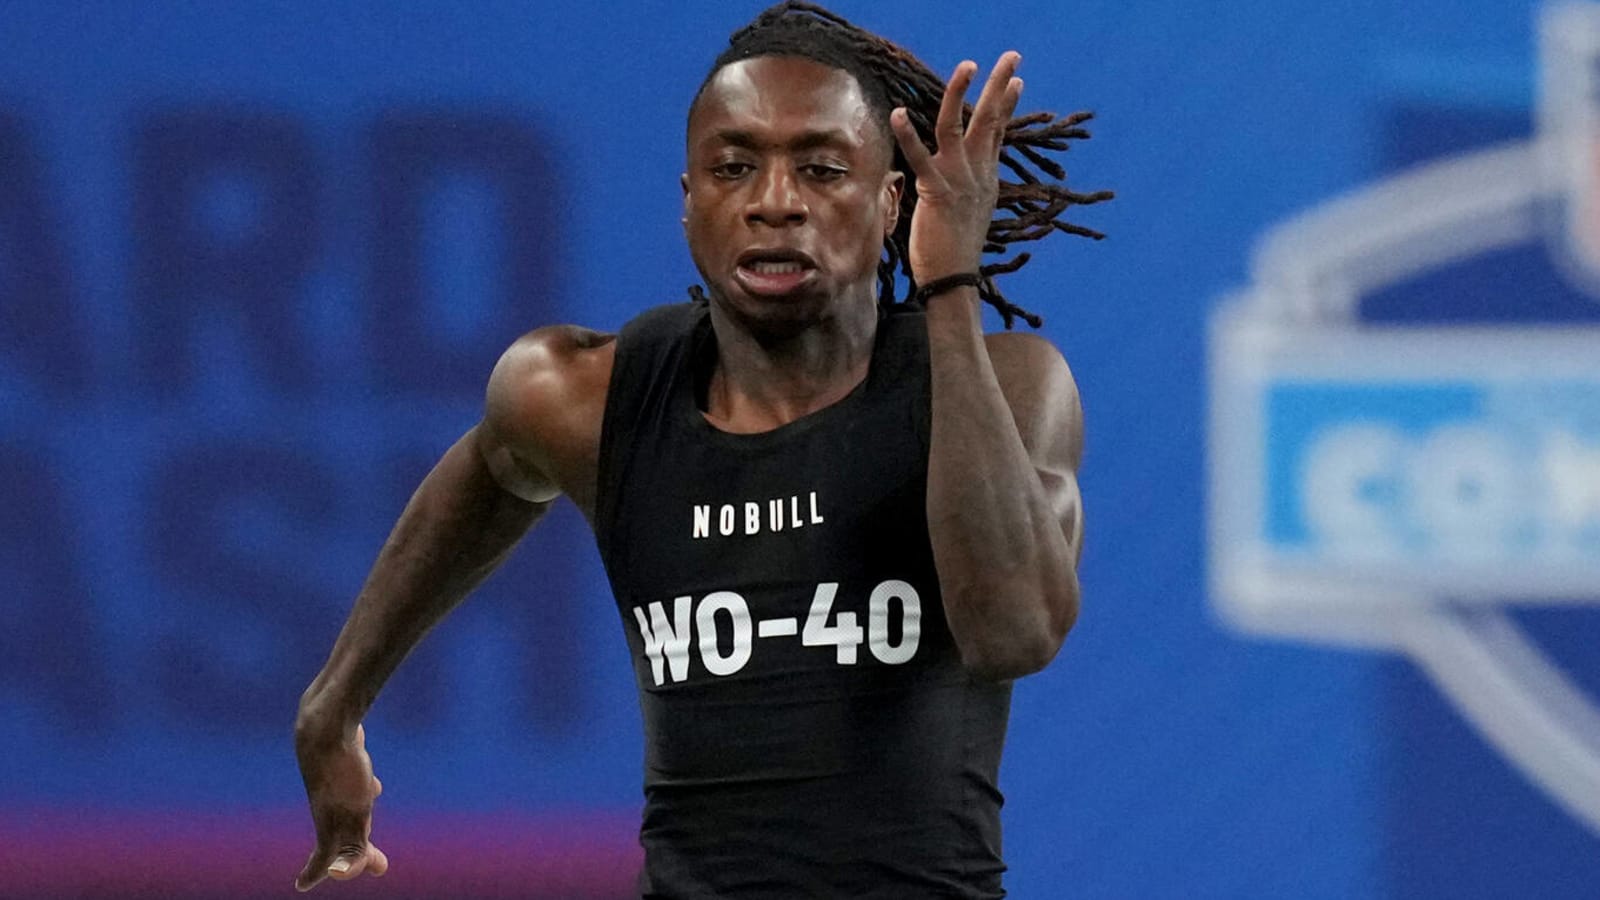 Simulcam shows just how narrowly Texas WR set record at combine